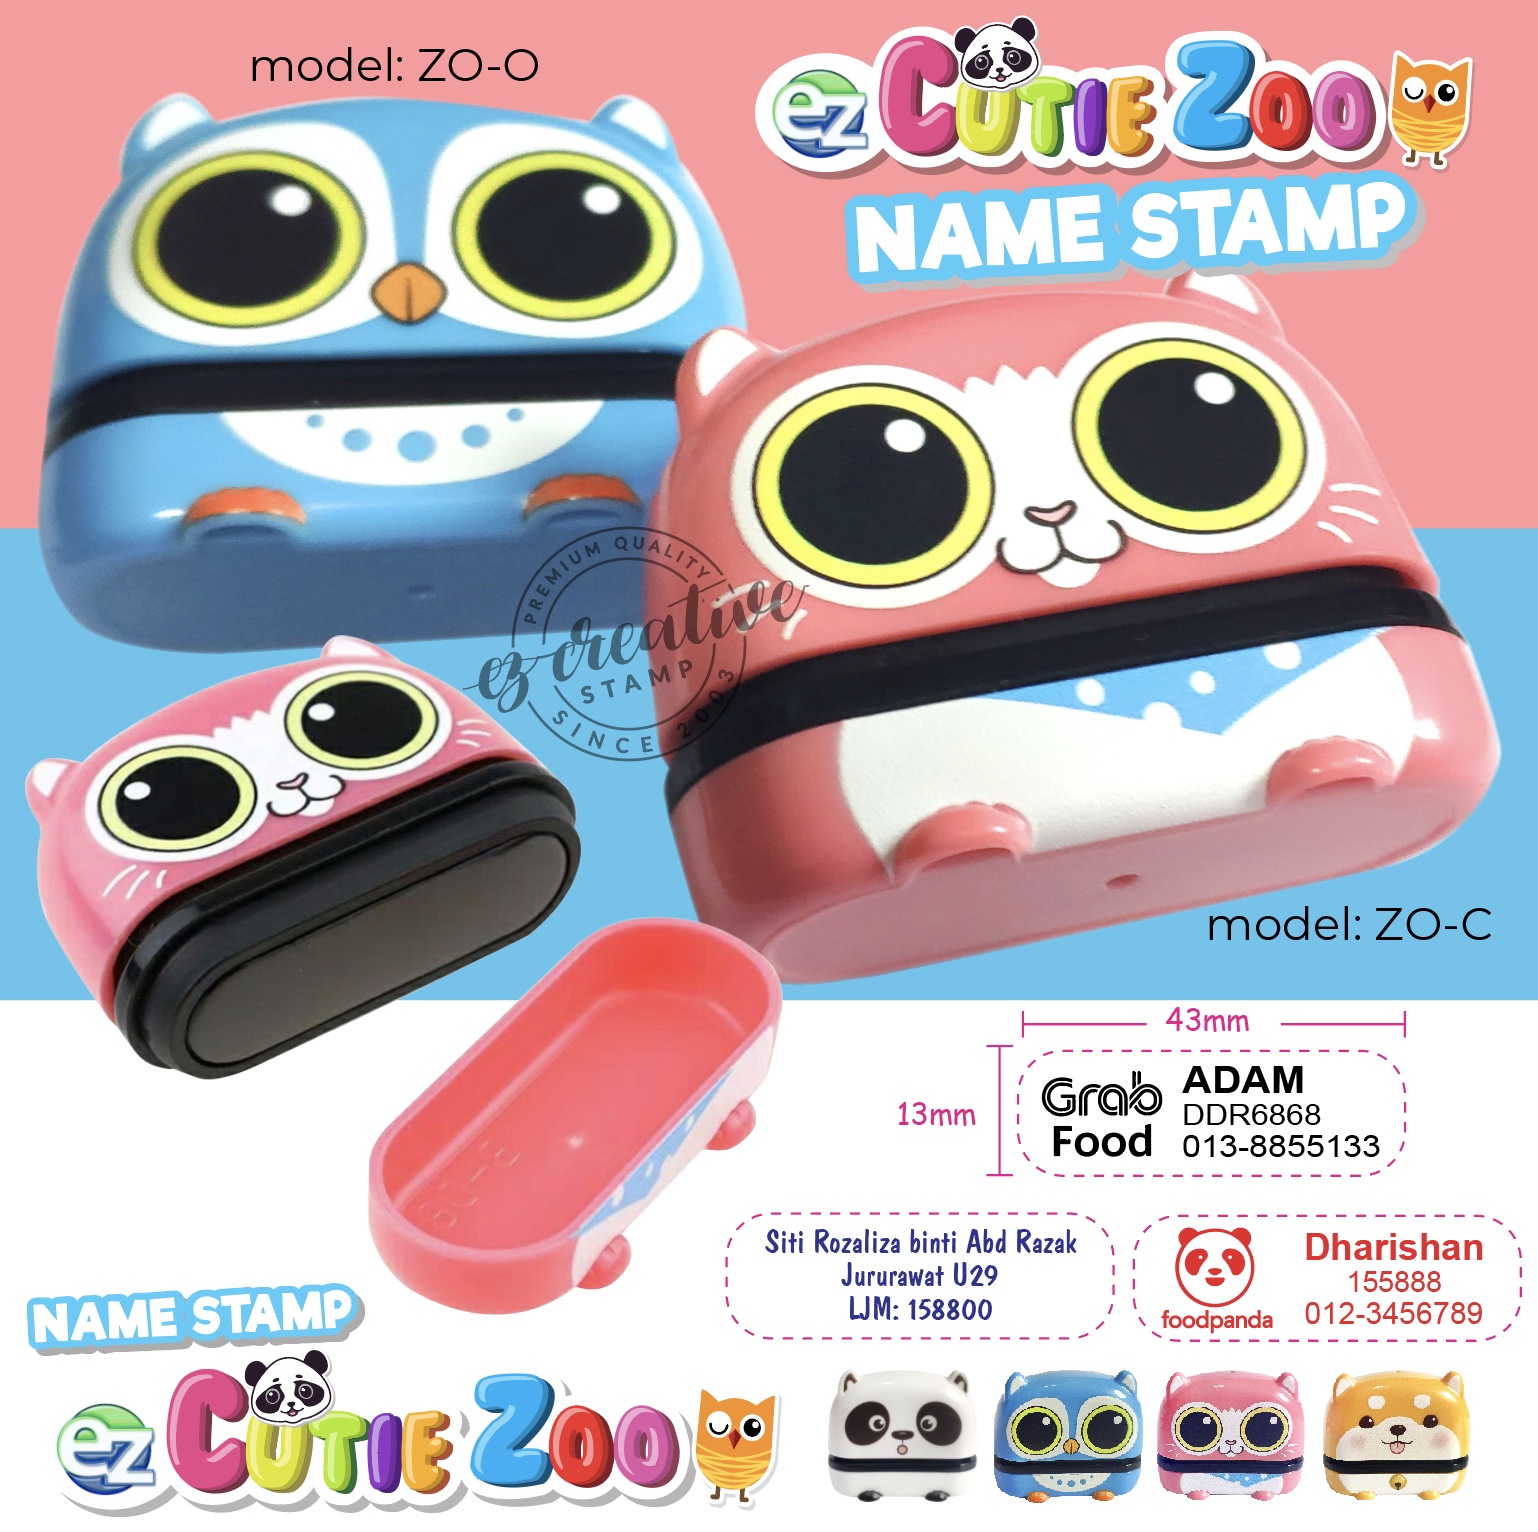 cutie zoo name stamp